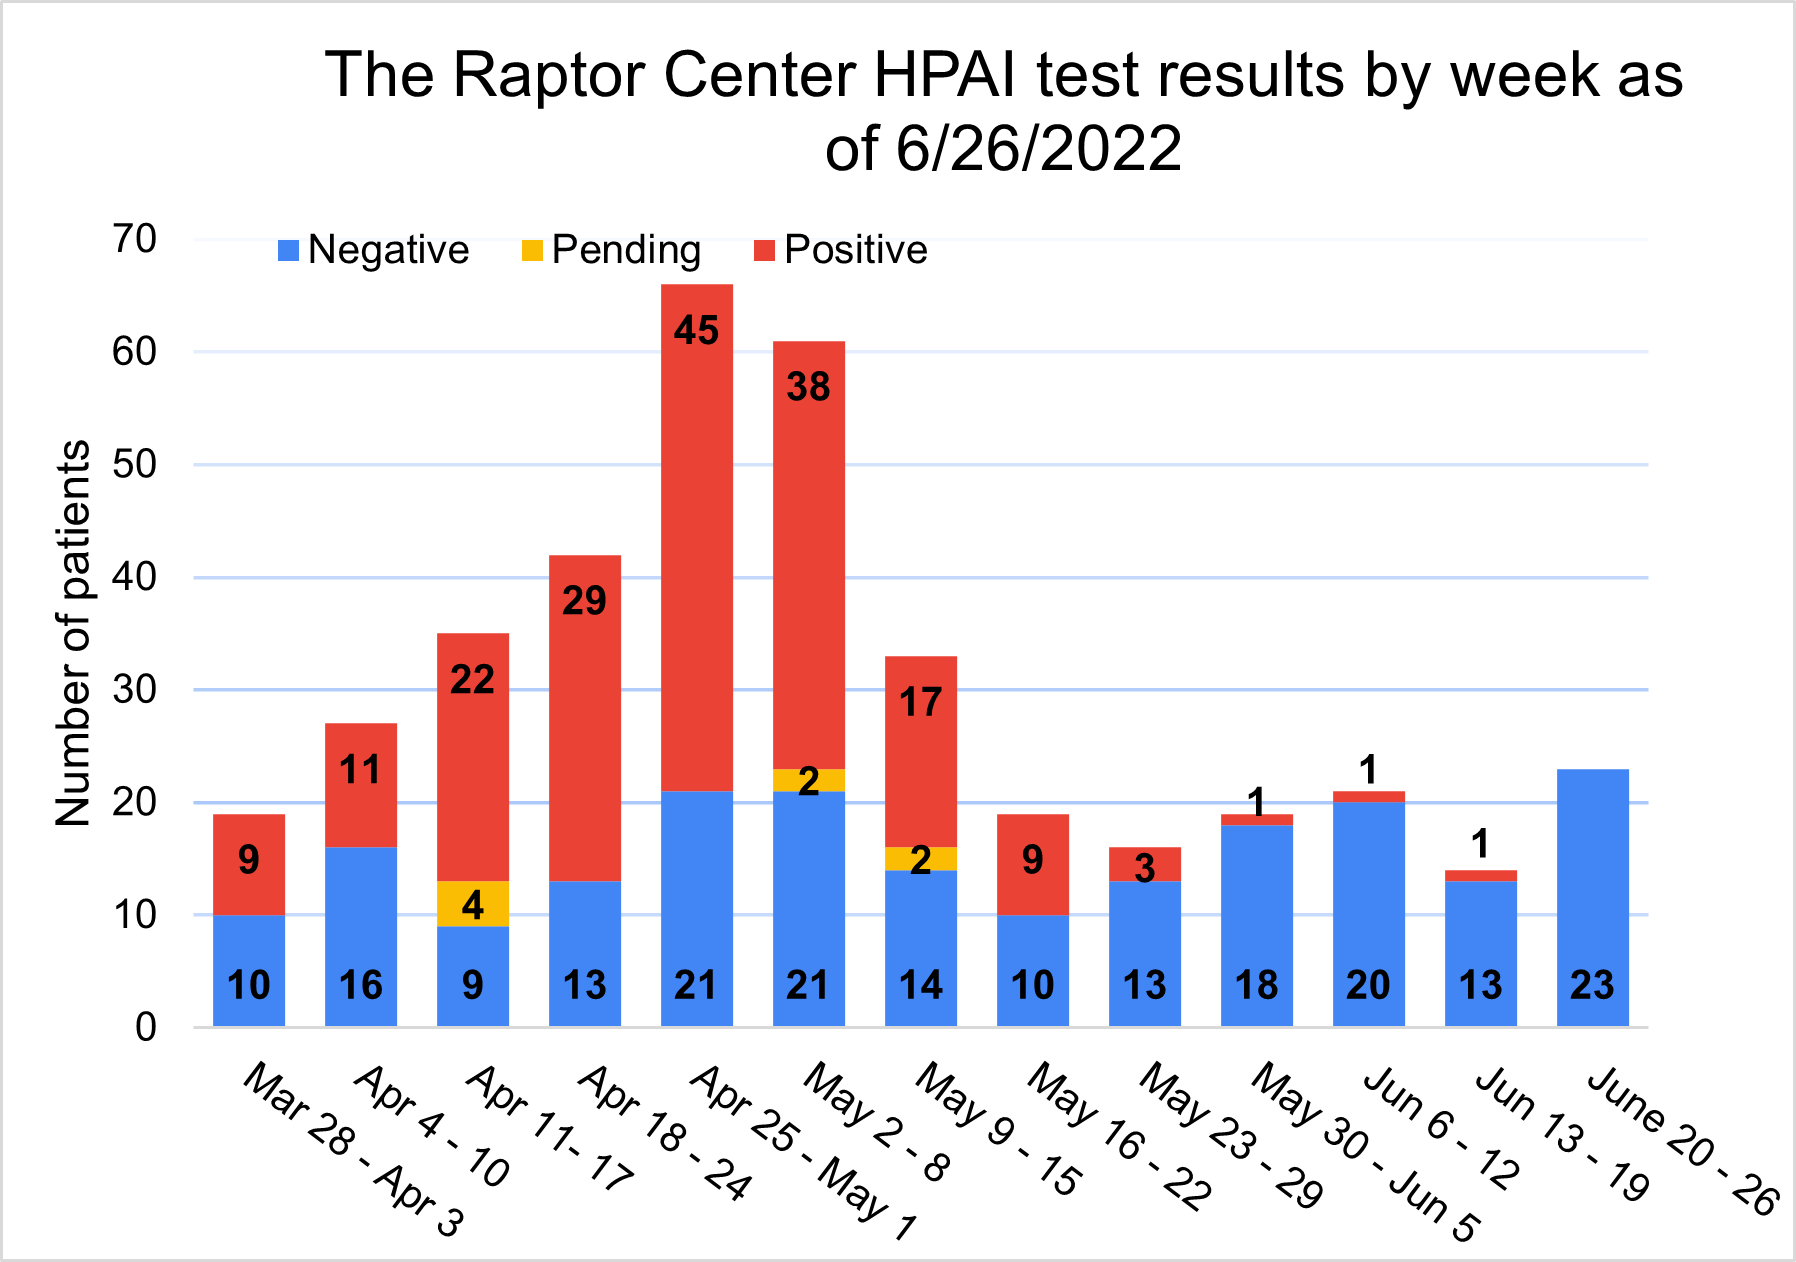 Stacked bar chart showing HPAI test results by week at The Raptor Center